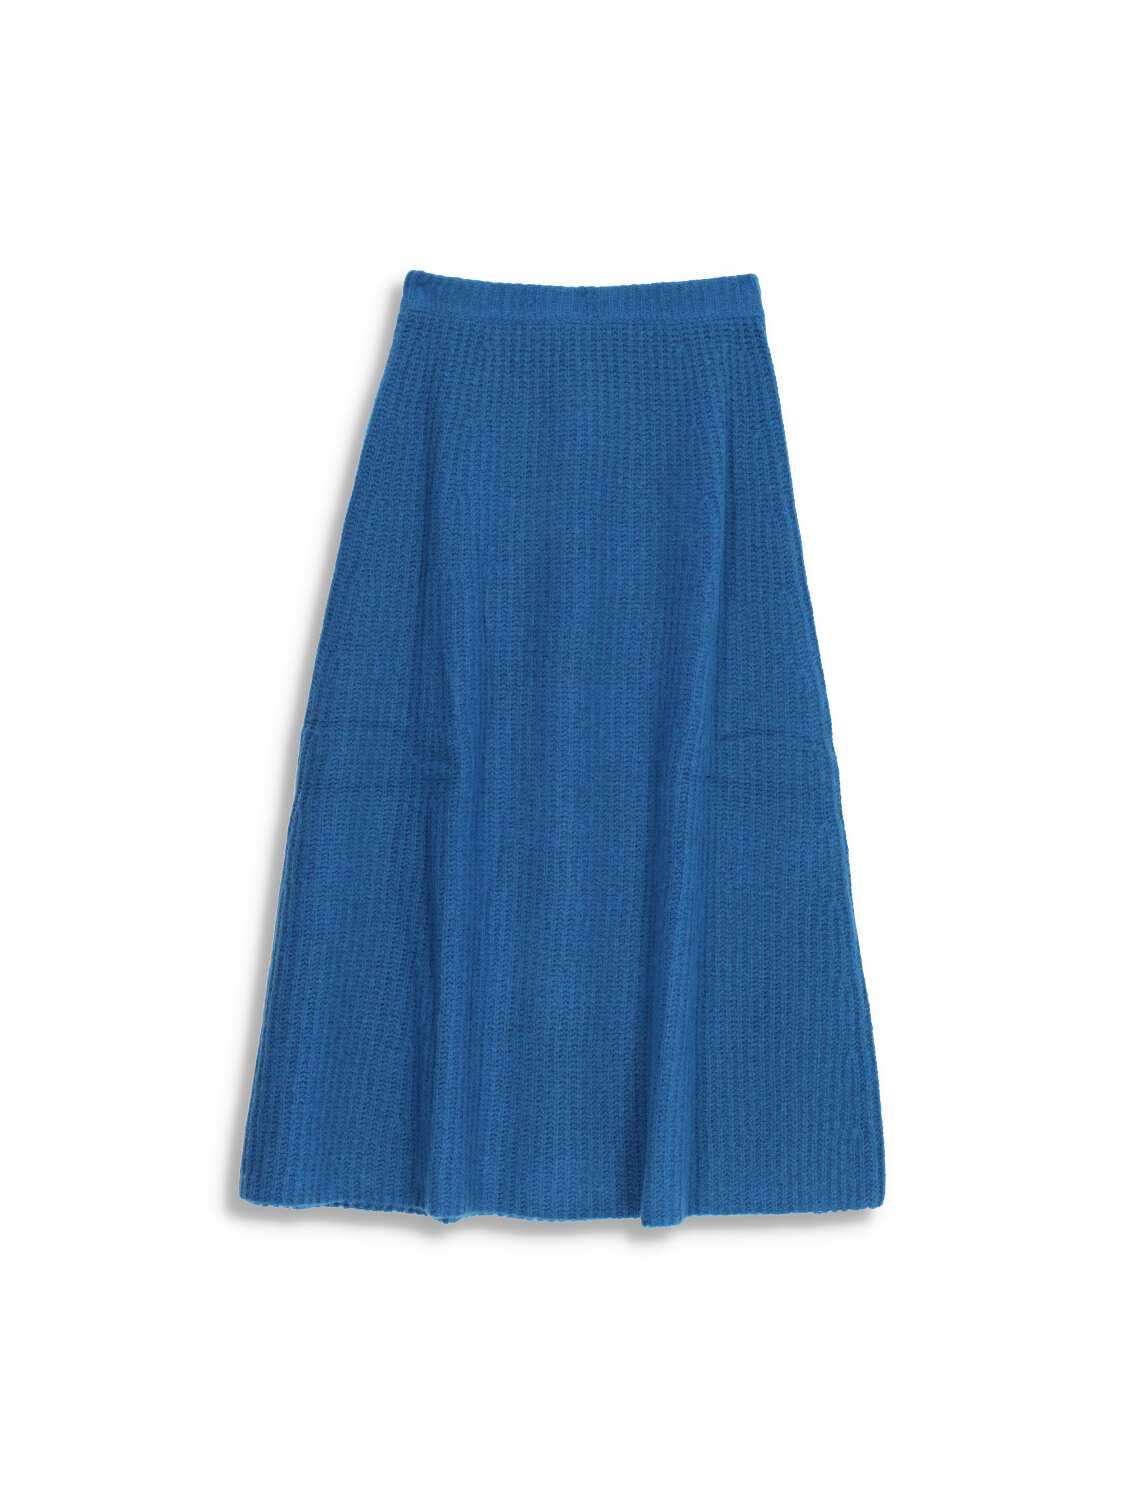 Fay - Midi skirt with elastic waistband in cashmere